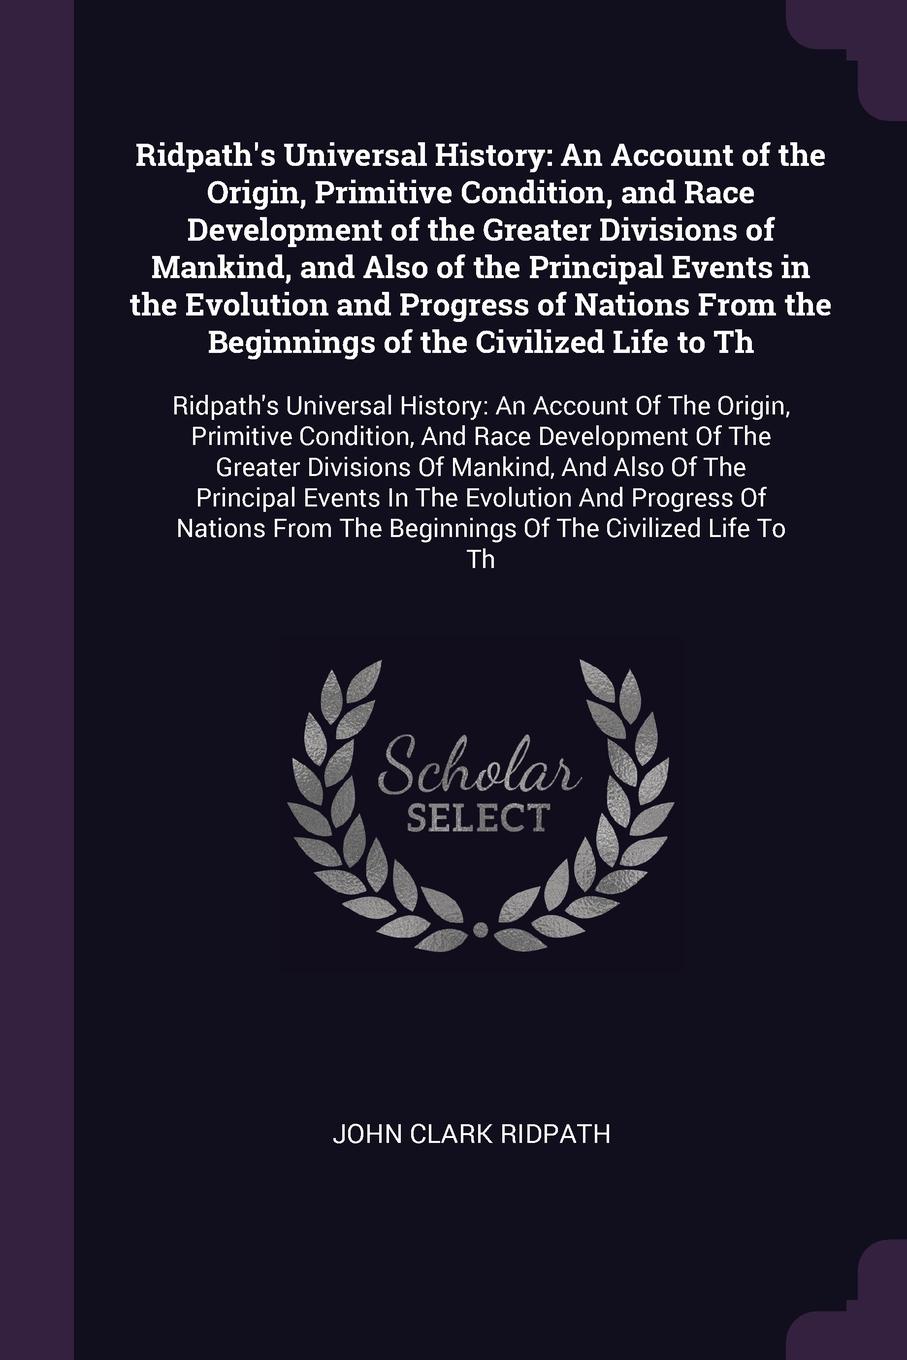 Ridpath`s Universal History. An Account of the Origin, Primitive Condition, and Race Development of the Greater Divisions of Mankind, and Also of the Principal Events in the Evolution and Progress of Nations From the Beginnings of the Civilized Li...